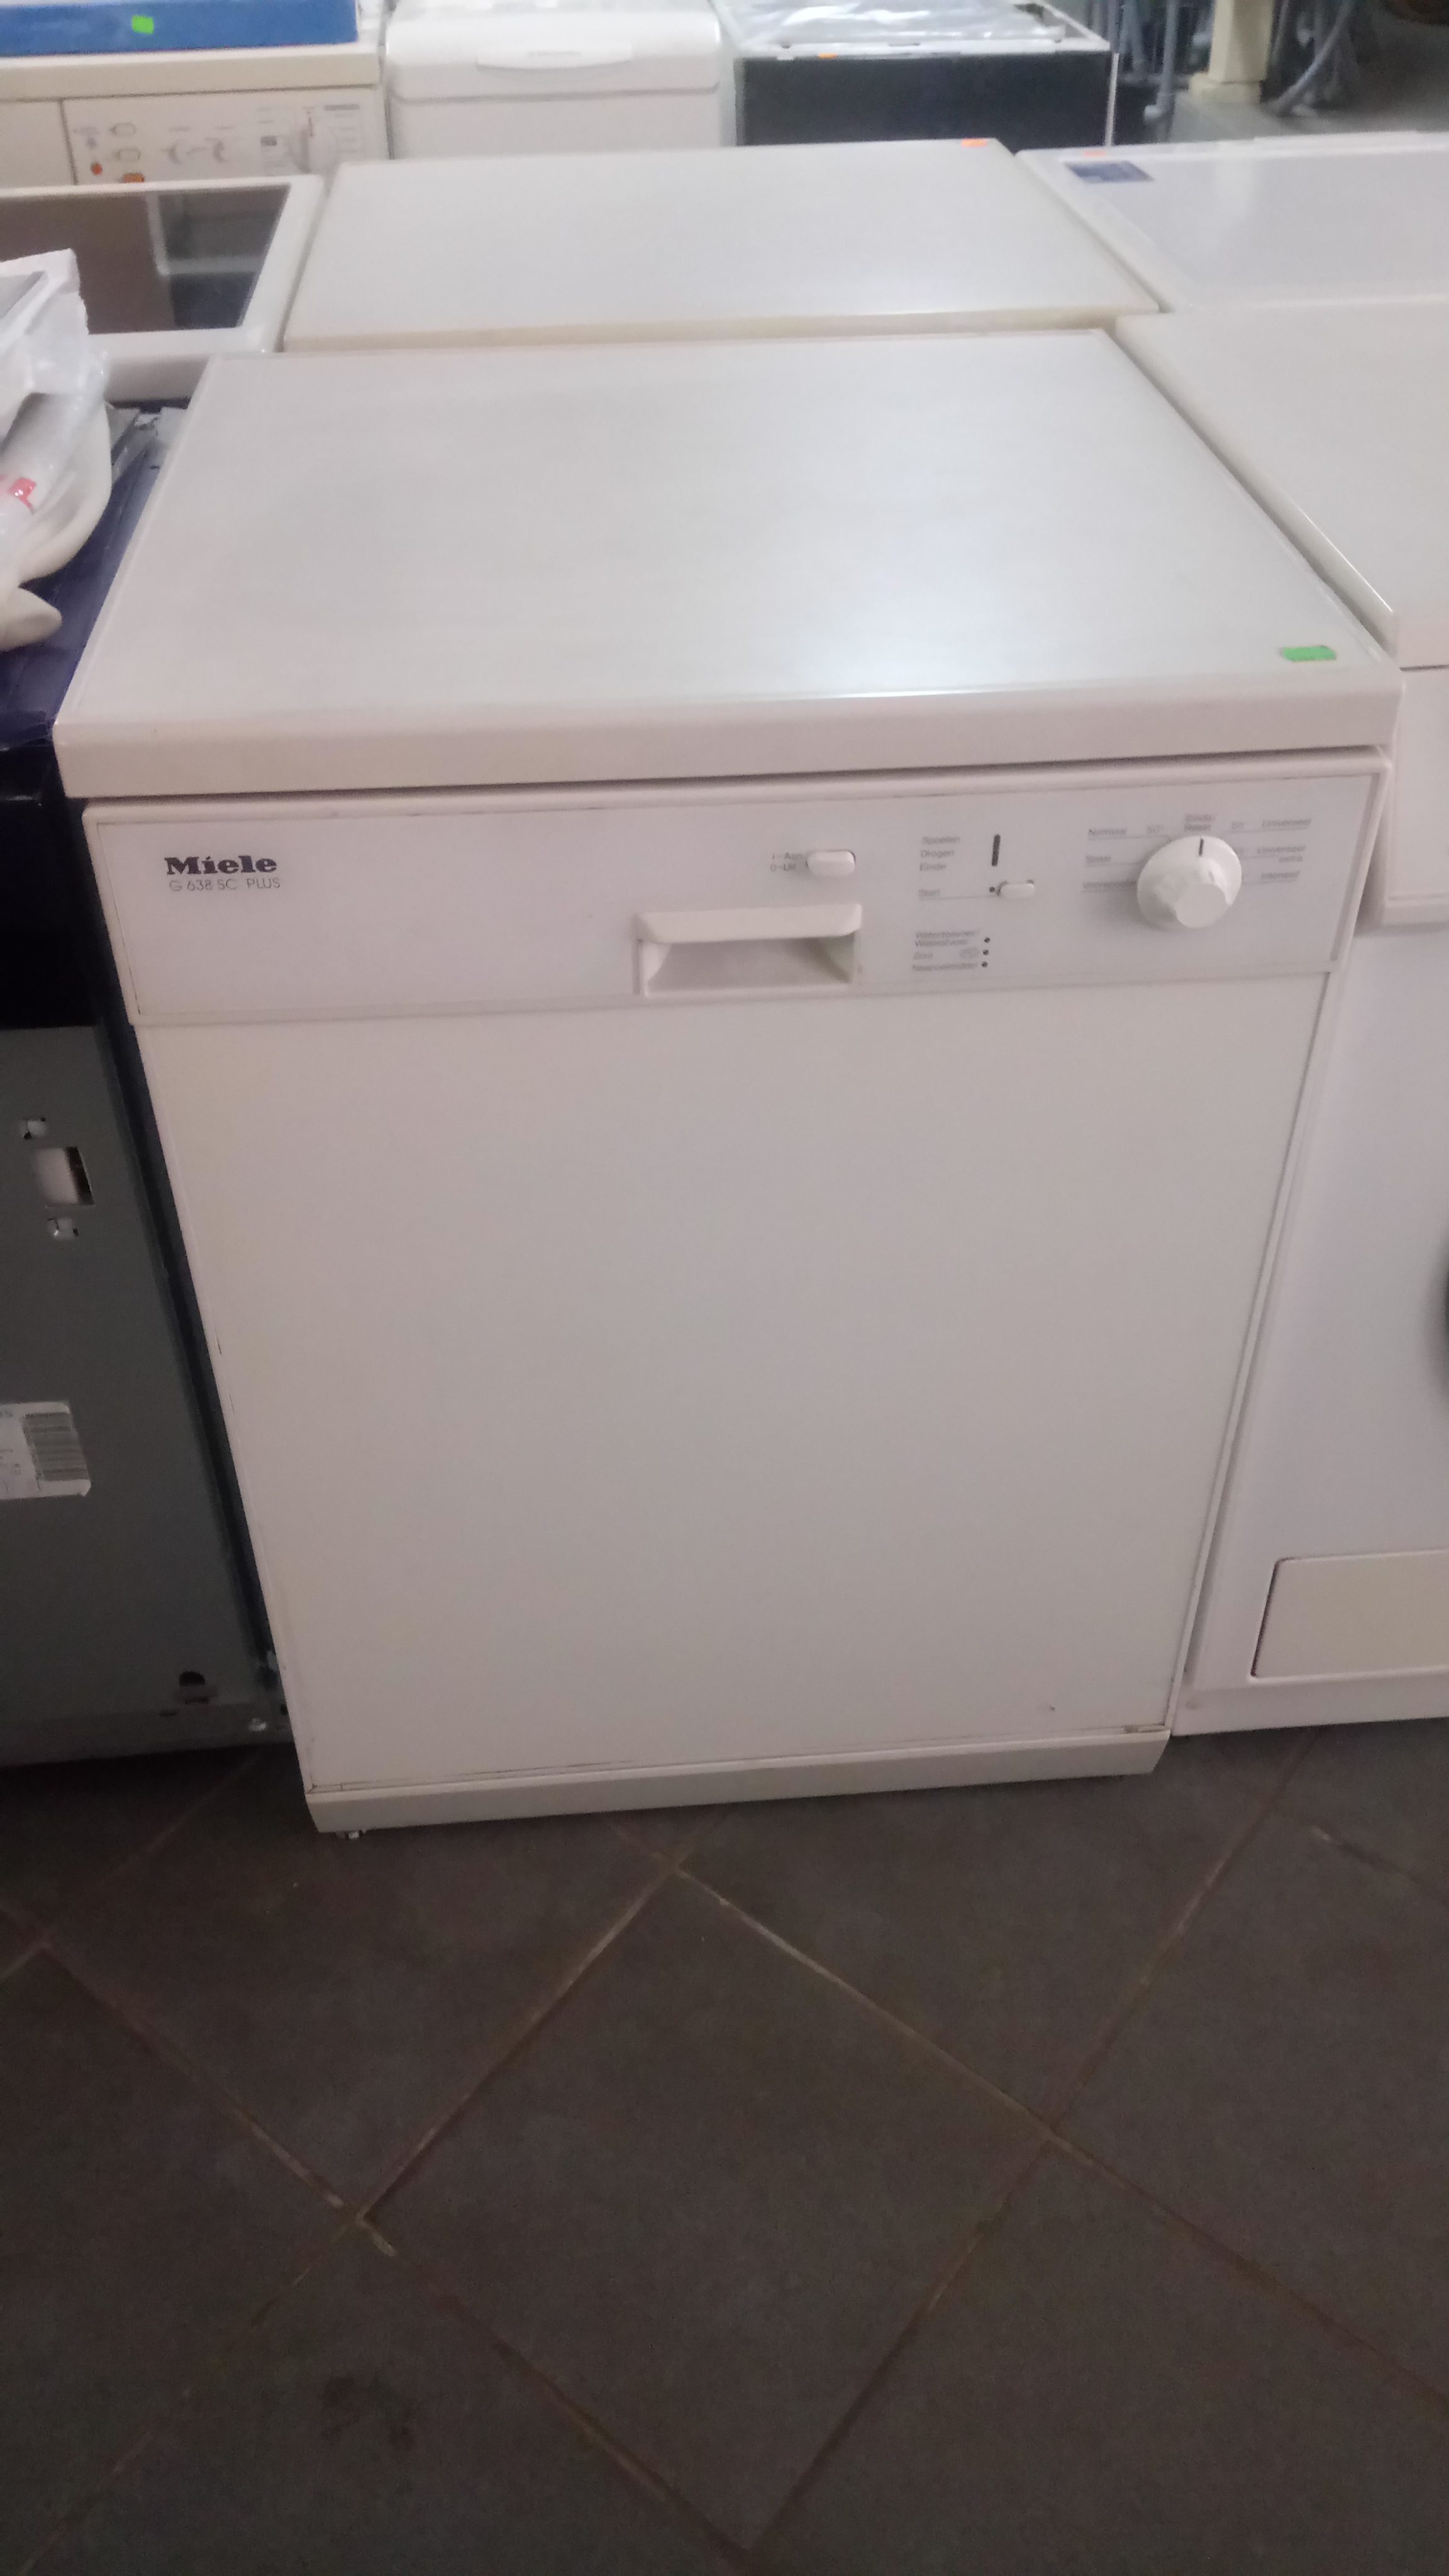 Miele G 638 SC Plus width 60 cm length 60 Washing machines, dishwashers and dryers